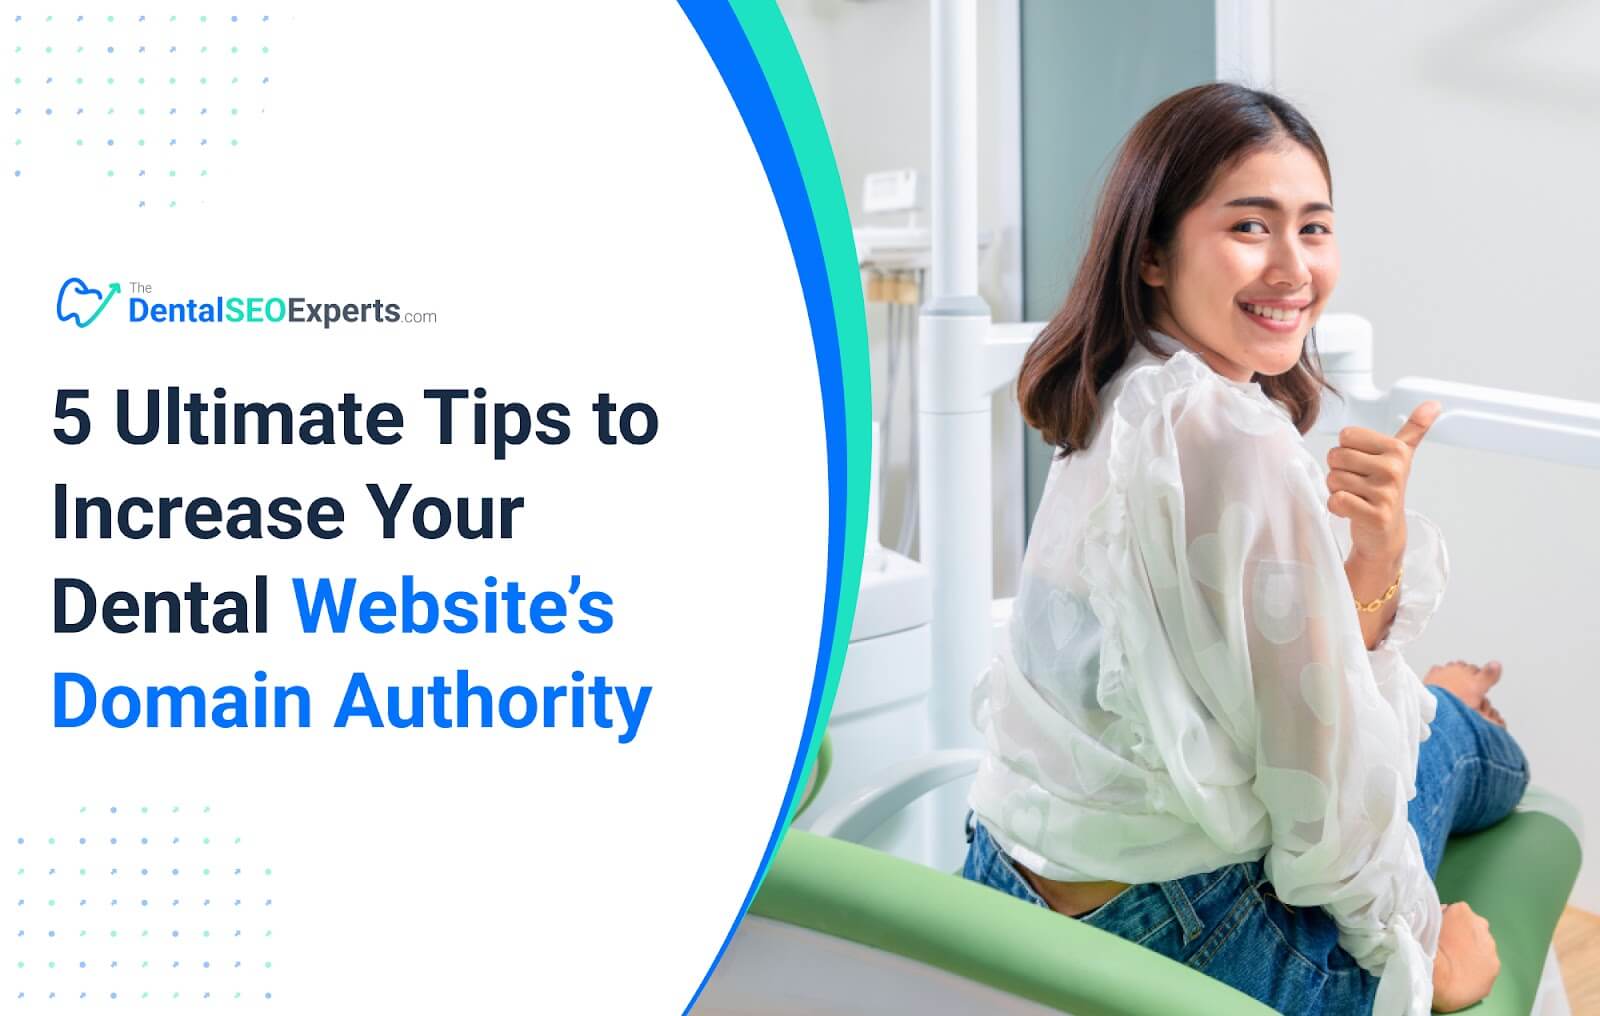 5 Ultimate Tips to Increase Your Dental Website’s Domain Authority